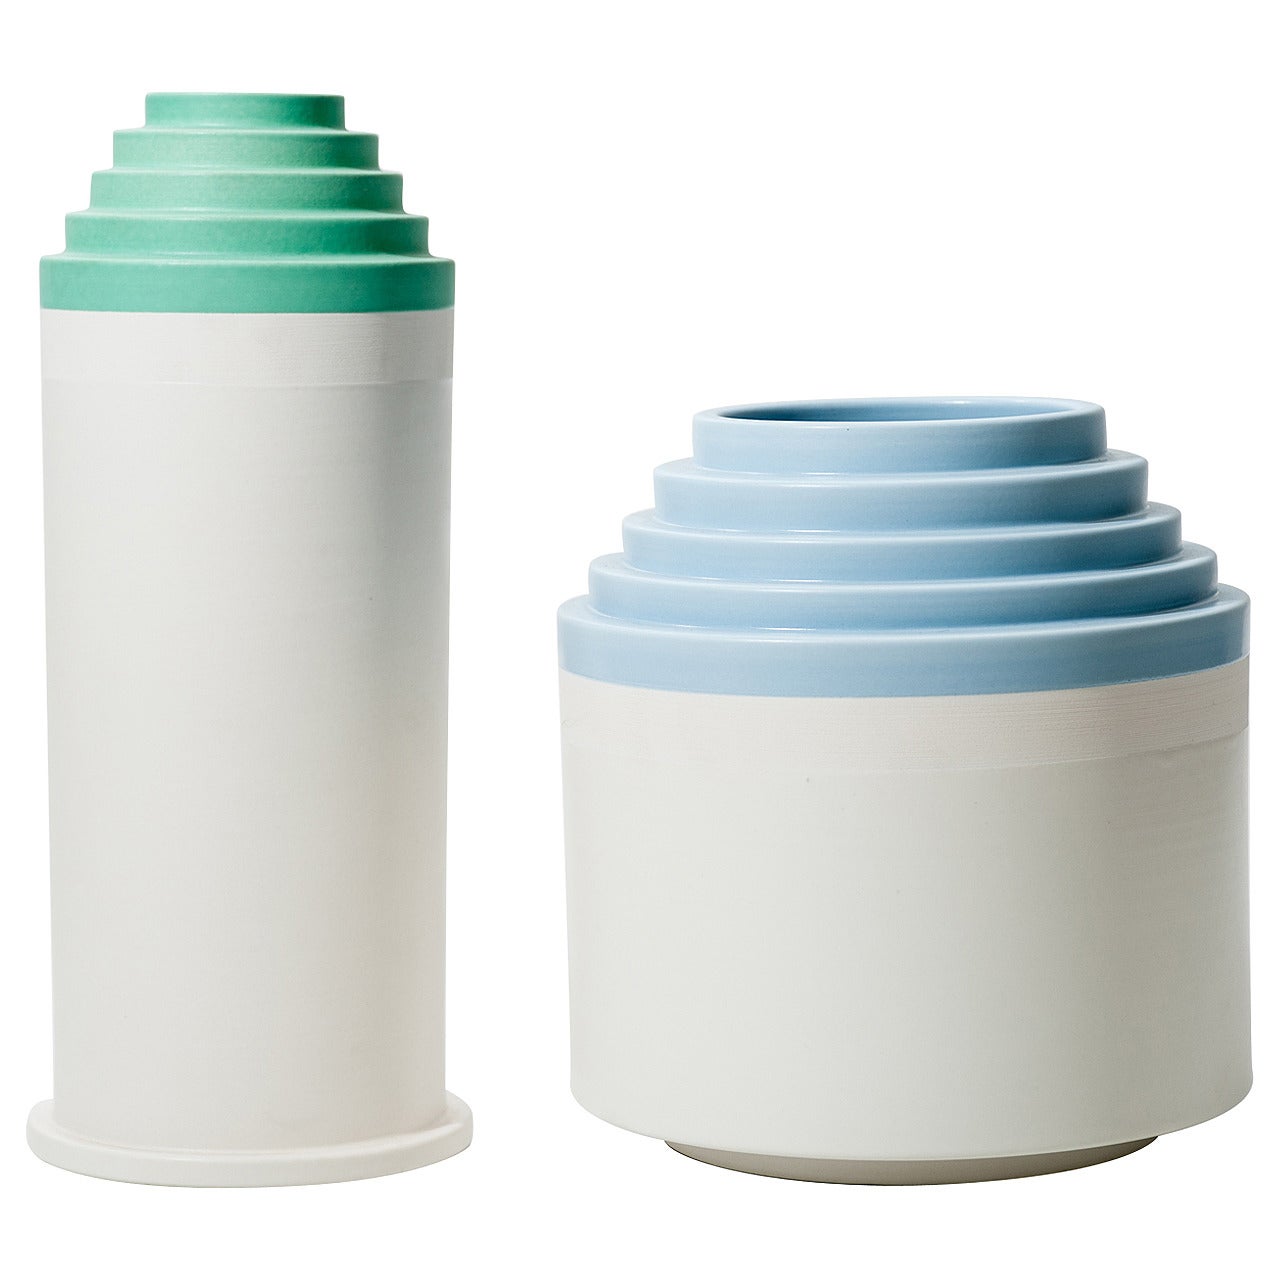 Pair of Vases by Ettore Sottsass, Bitossi